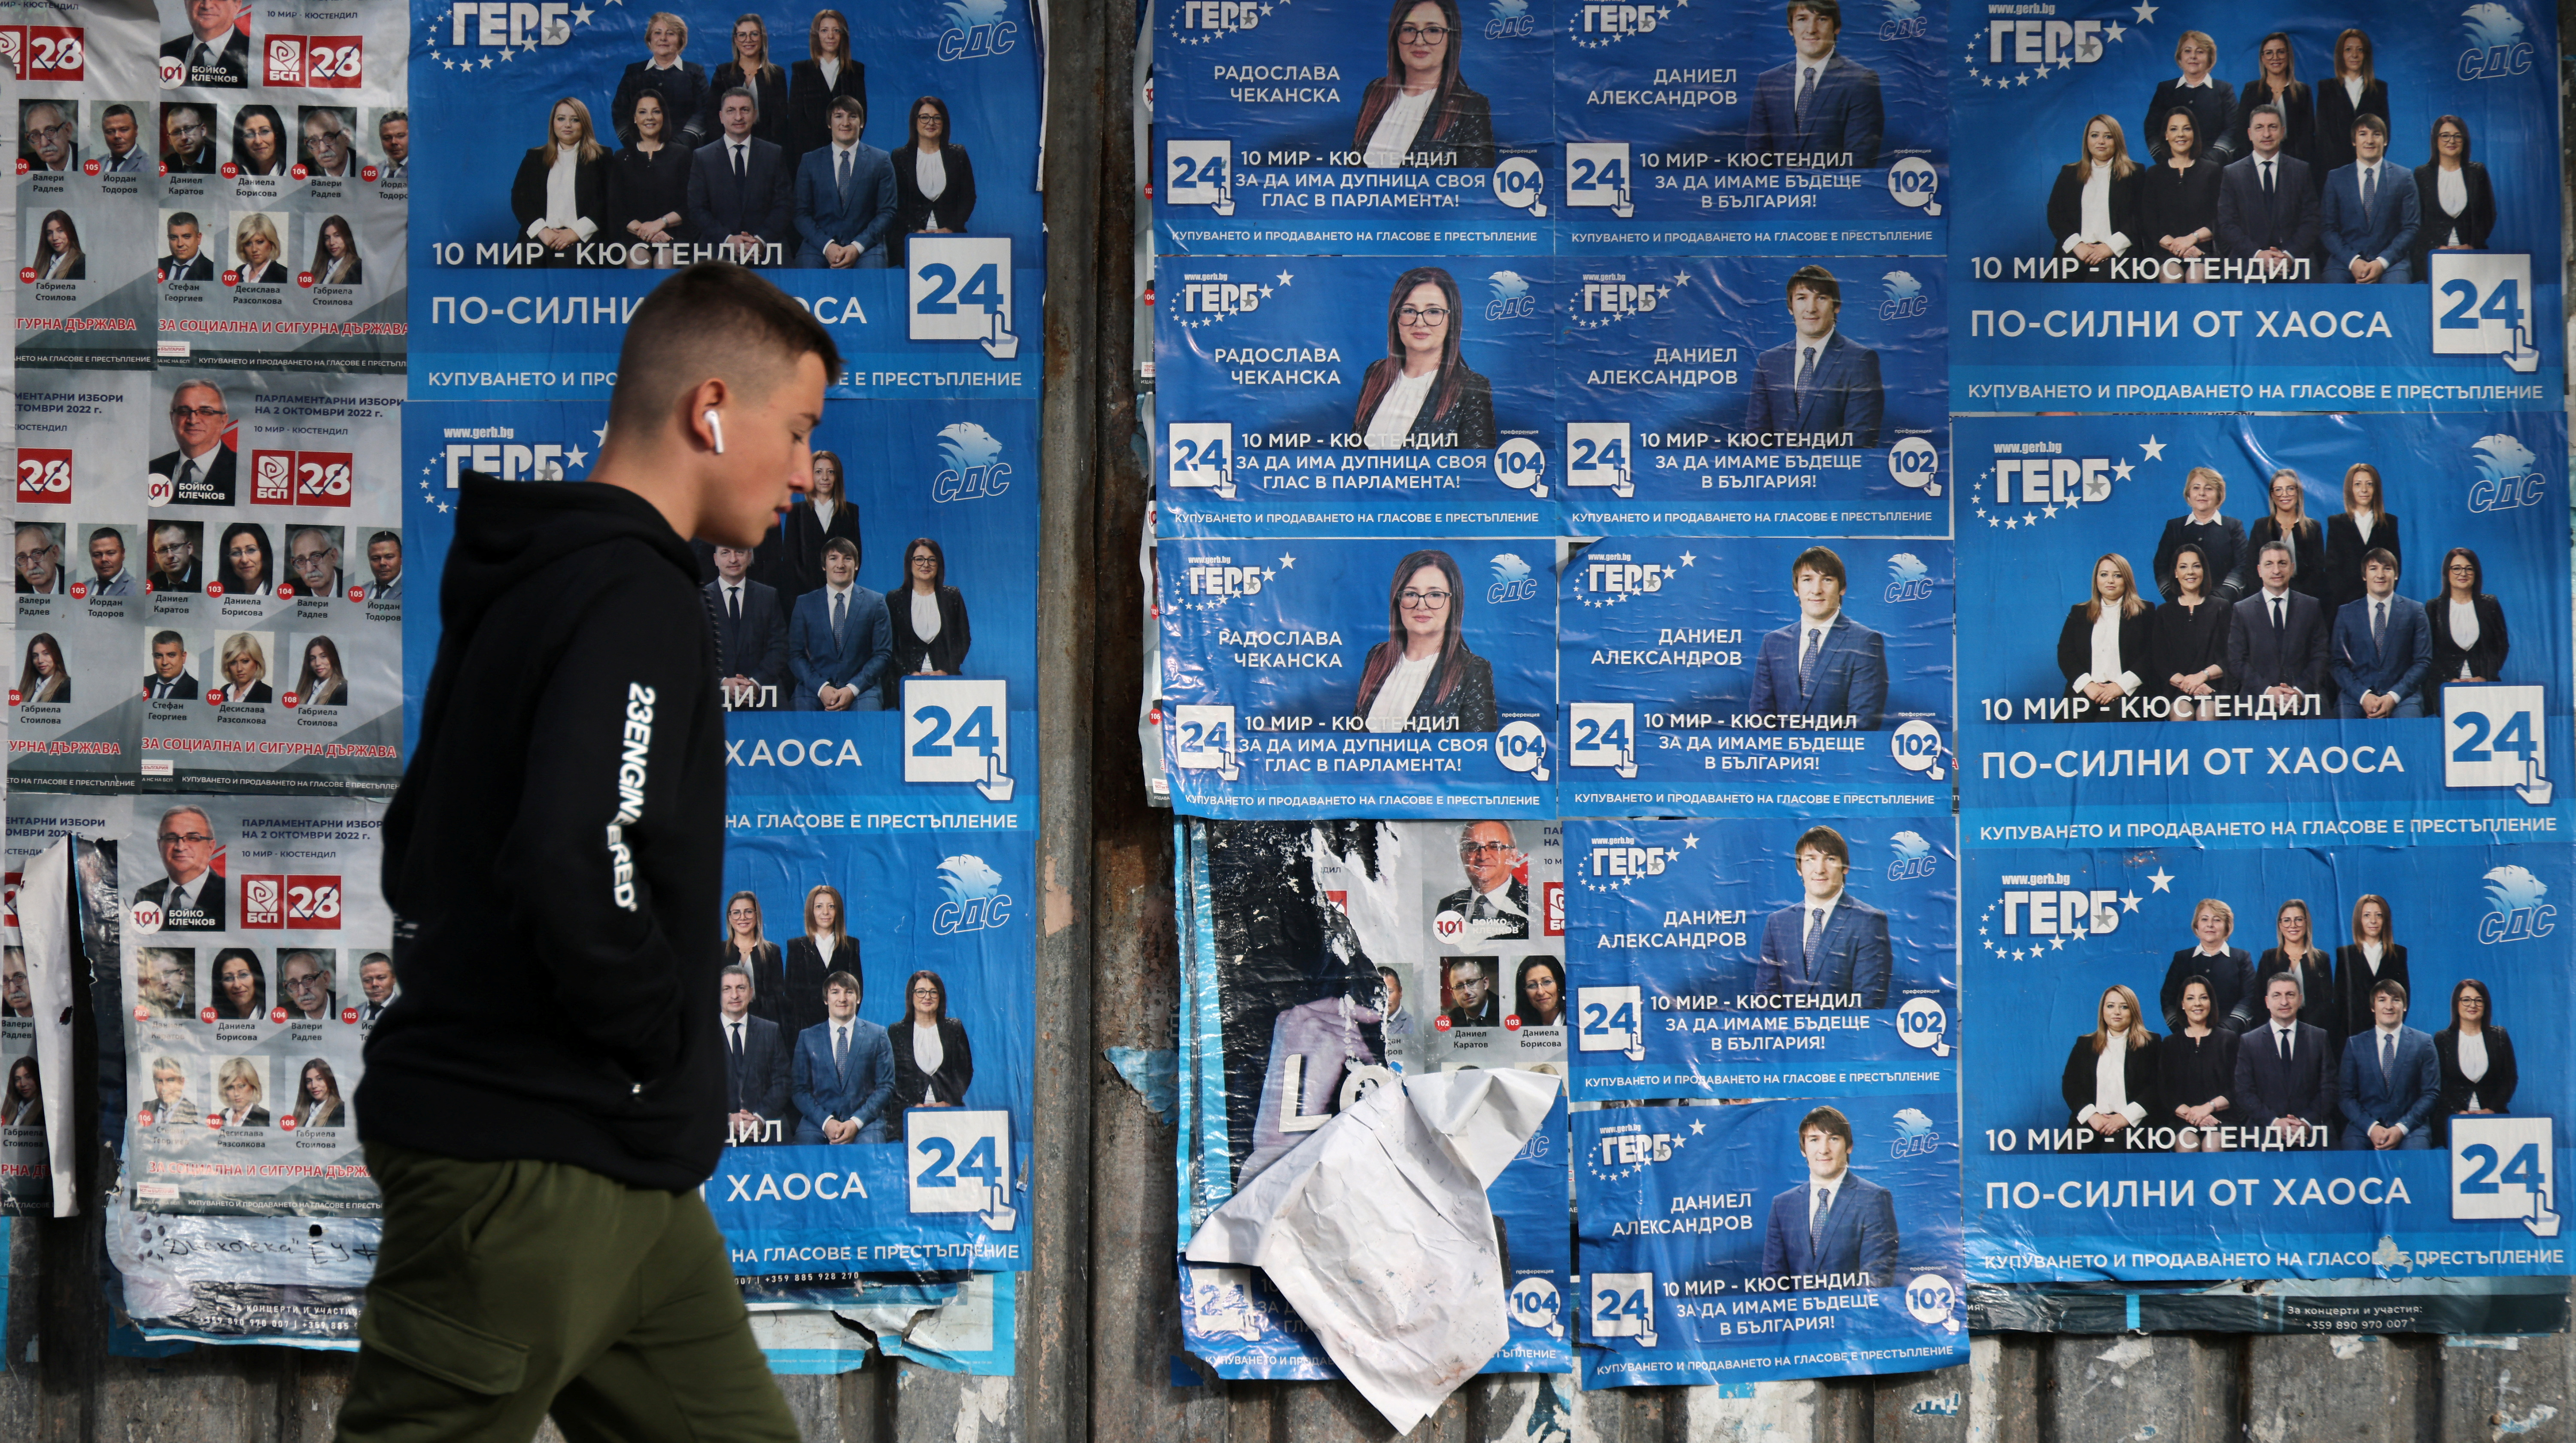 Man walks past election posters of centre-right GERB party in the town of Dupnitsa